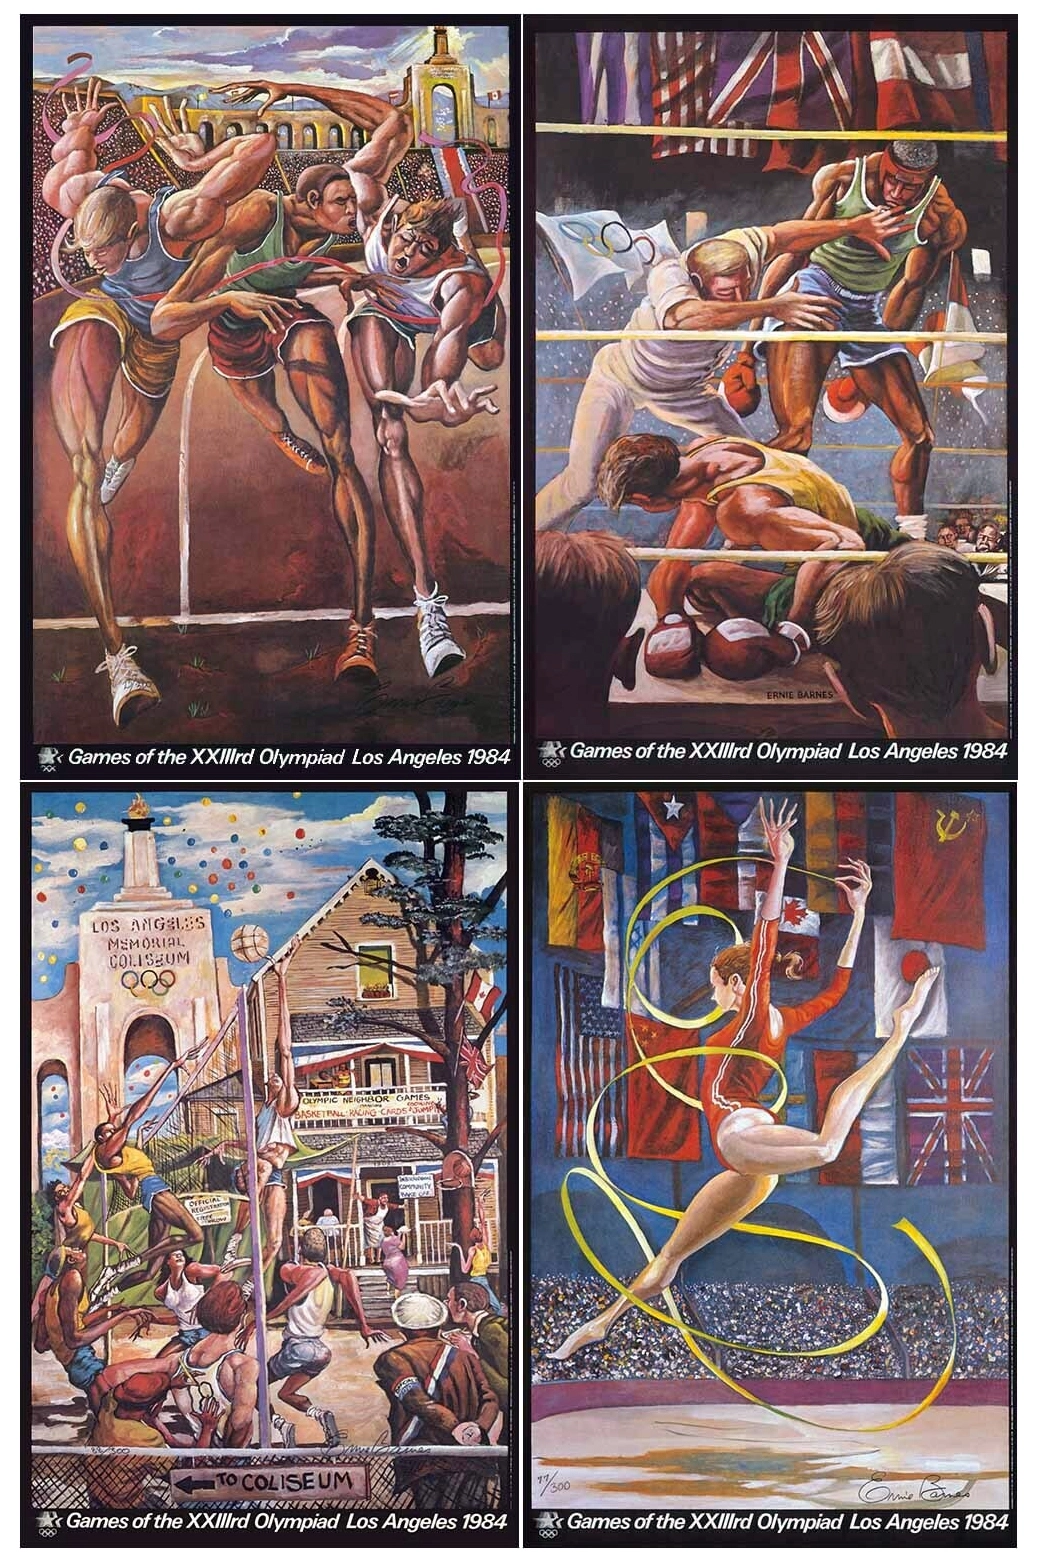 Ernie Barnes 1984 Limited Edition Olympic Series Numbered Set Hand Signed in Pencil Lithograph